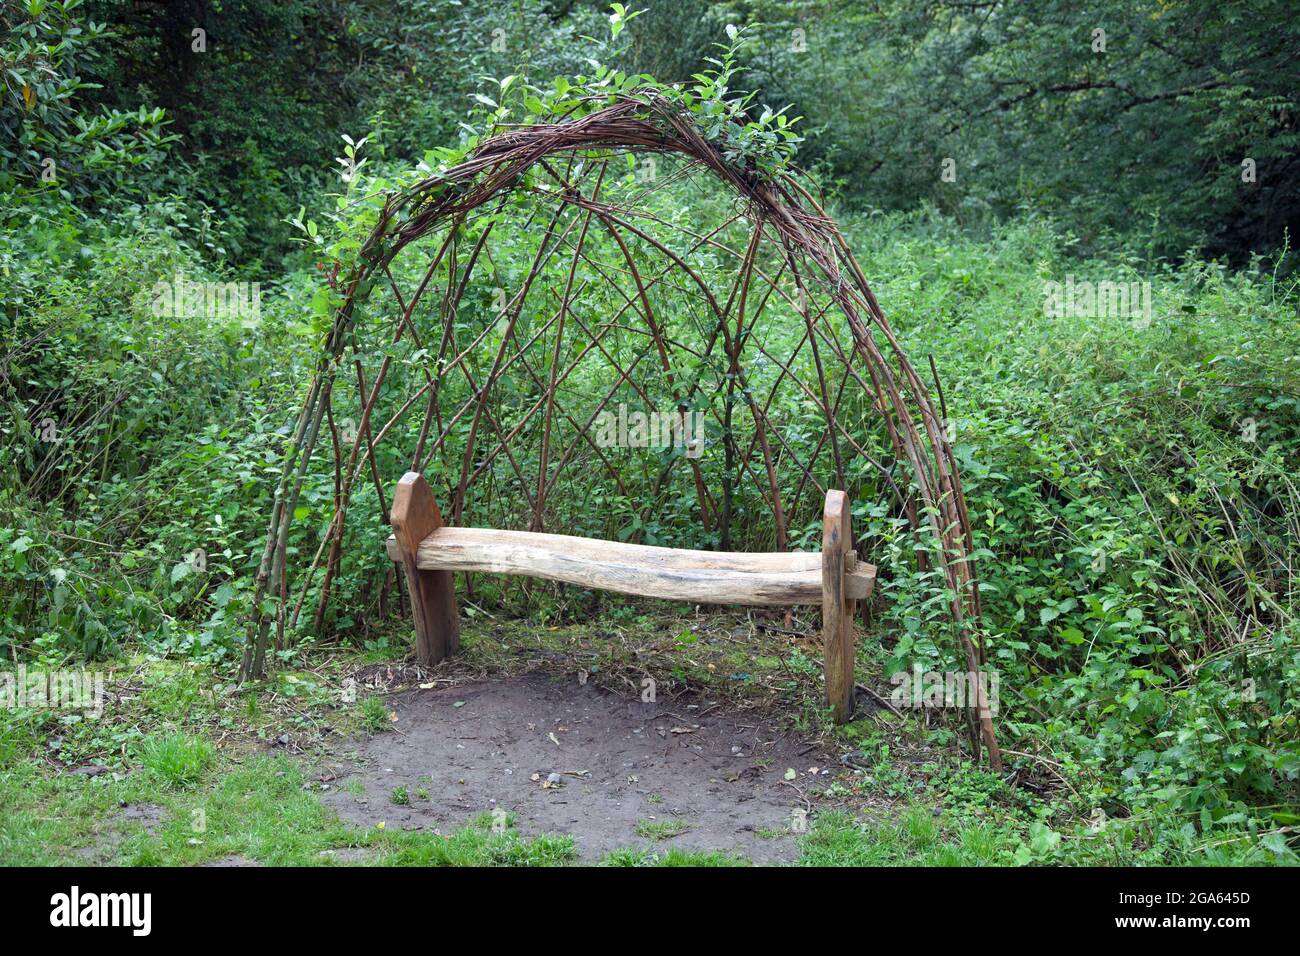 A simple, rustic wooden bench under a lattice wicker domed arch, provided for the public to rest awhile Stock Photo